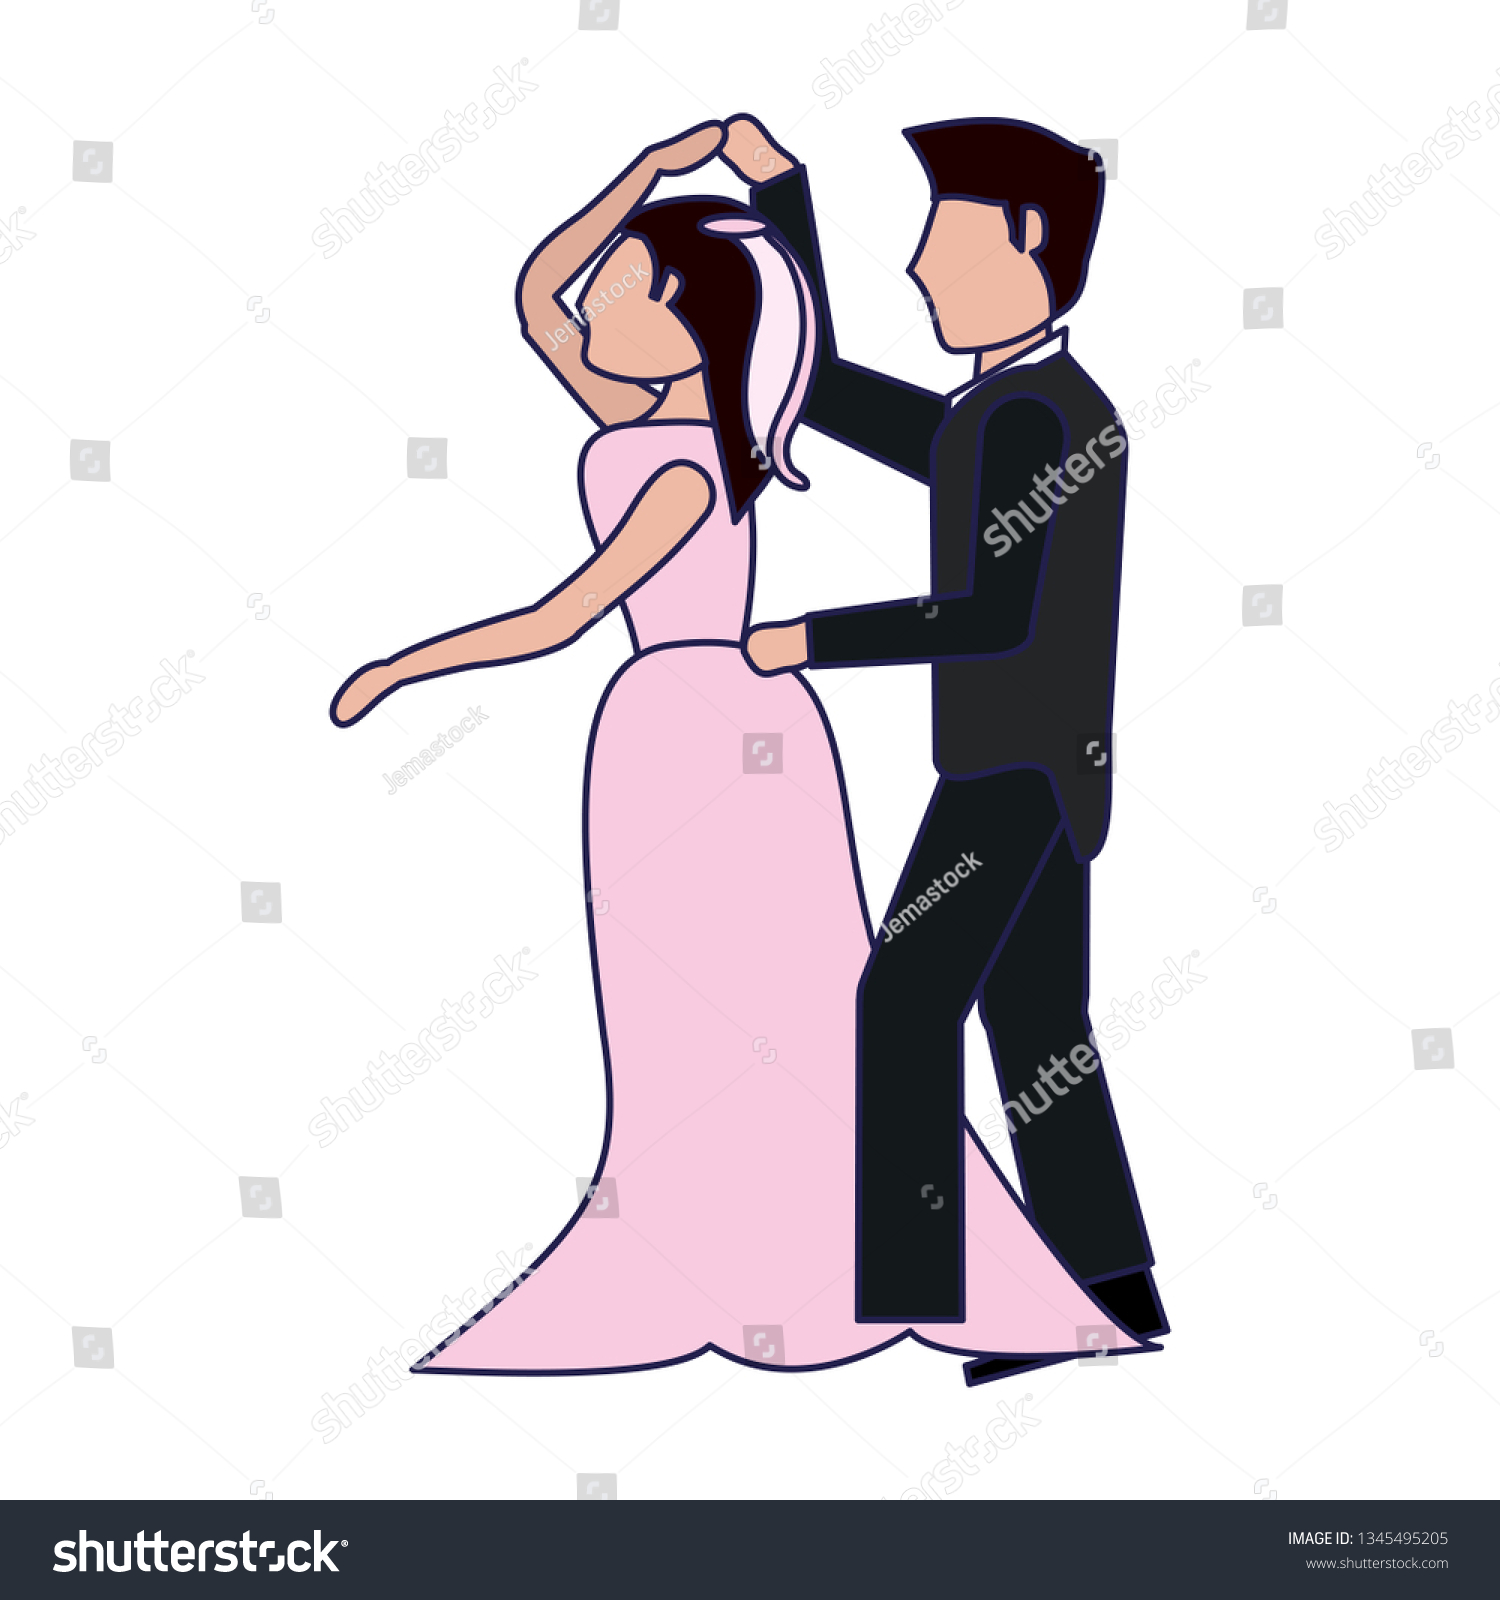 Wedding Couple Dancing Blue Lines Royalty Free Stock Vector 1345495205 6192